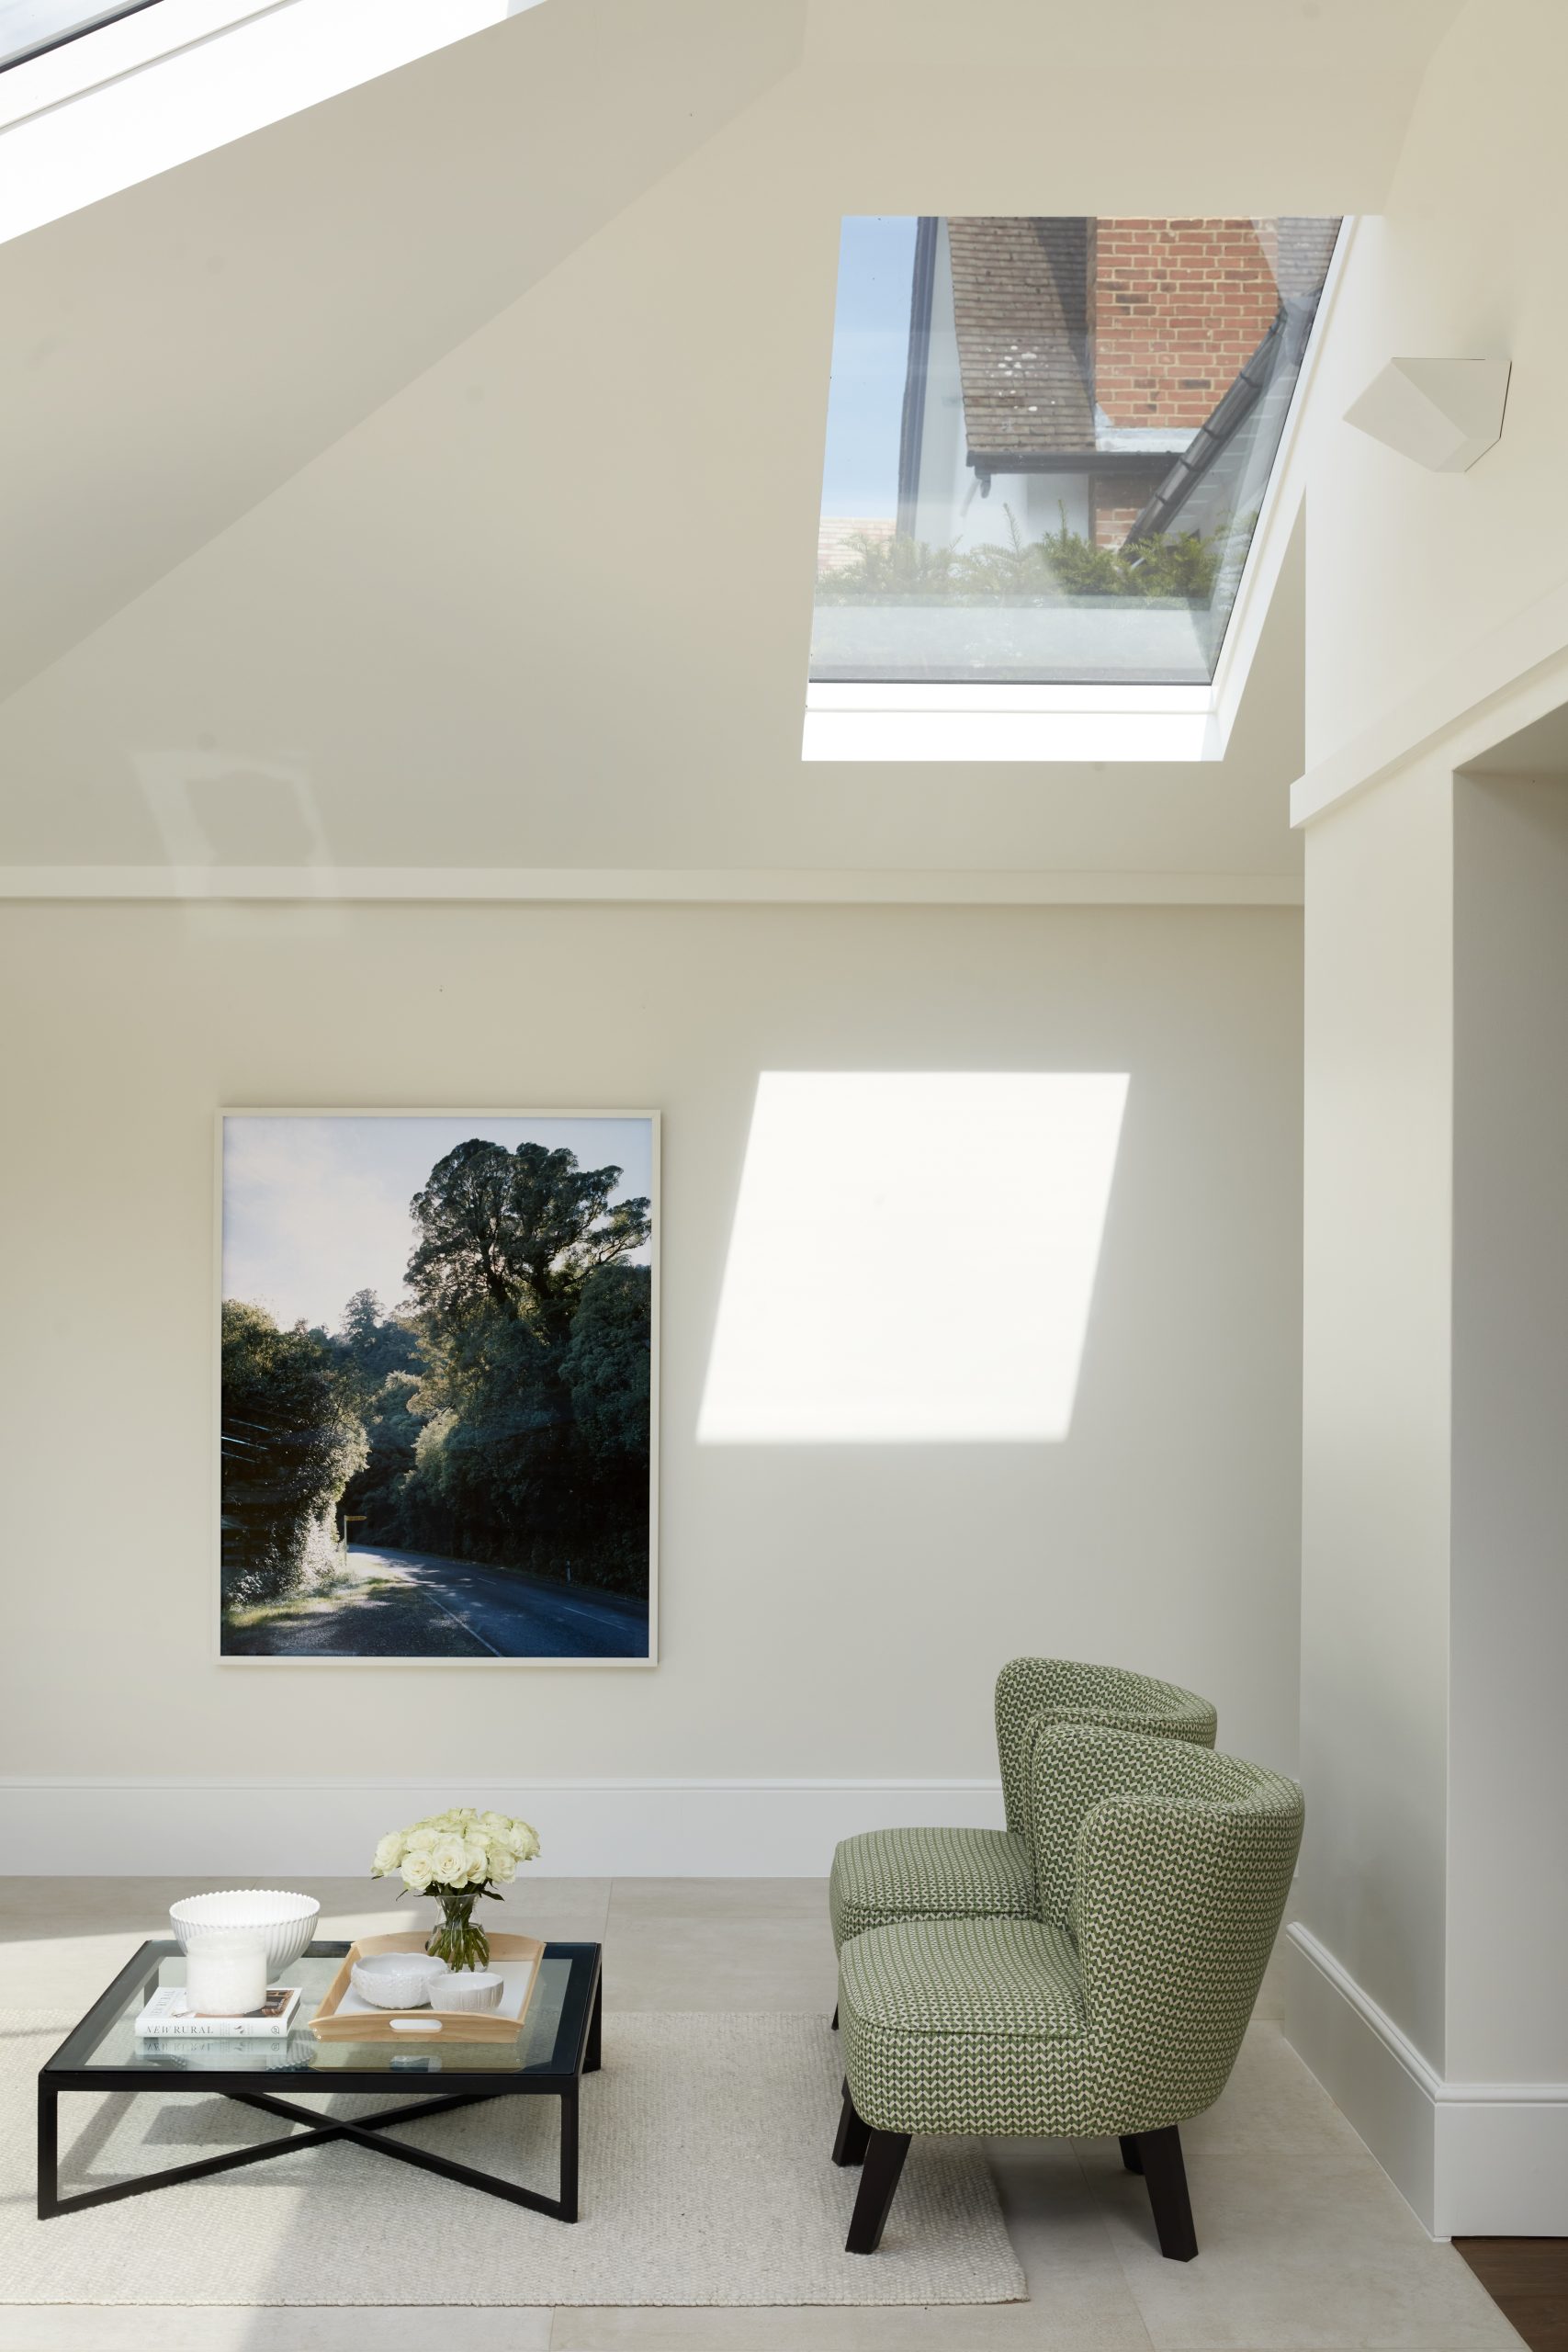 An updated brick extension for an Edwardian home includes a sitting area with a skylight.